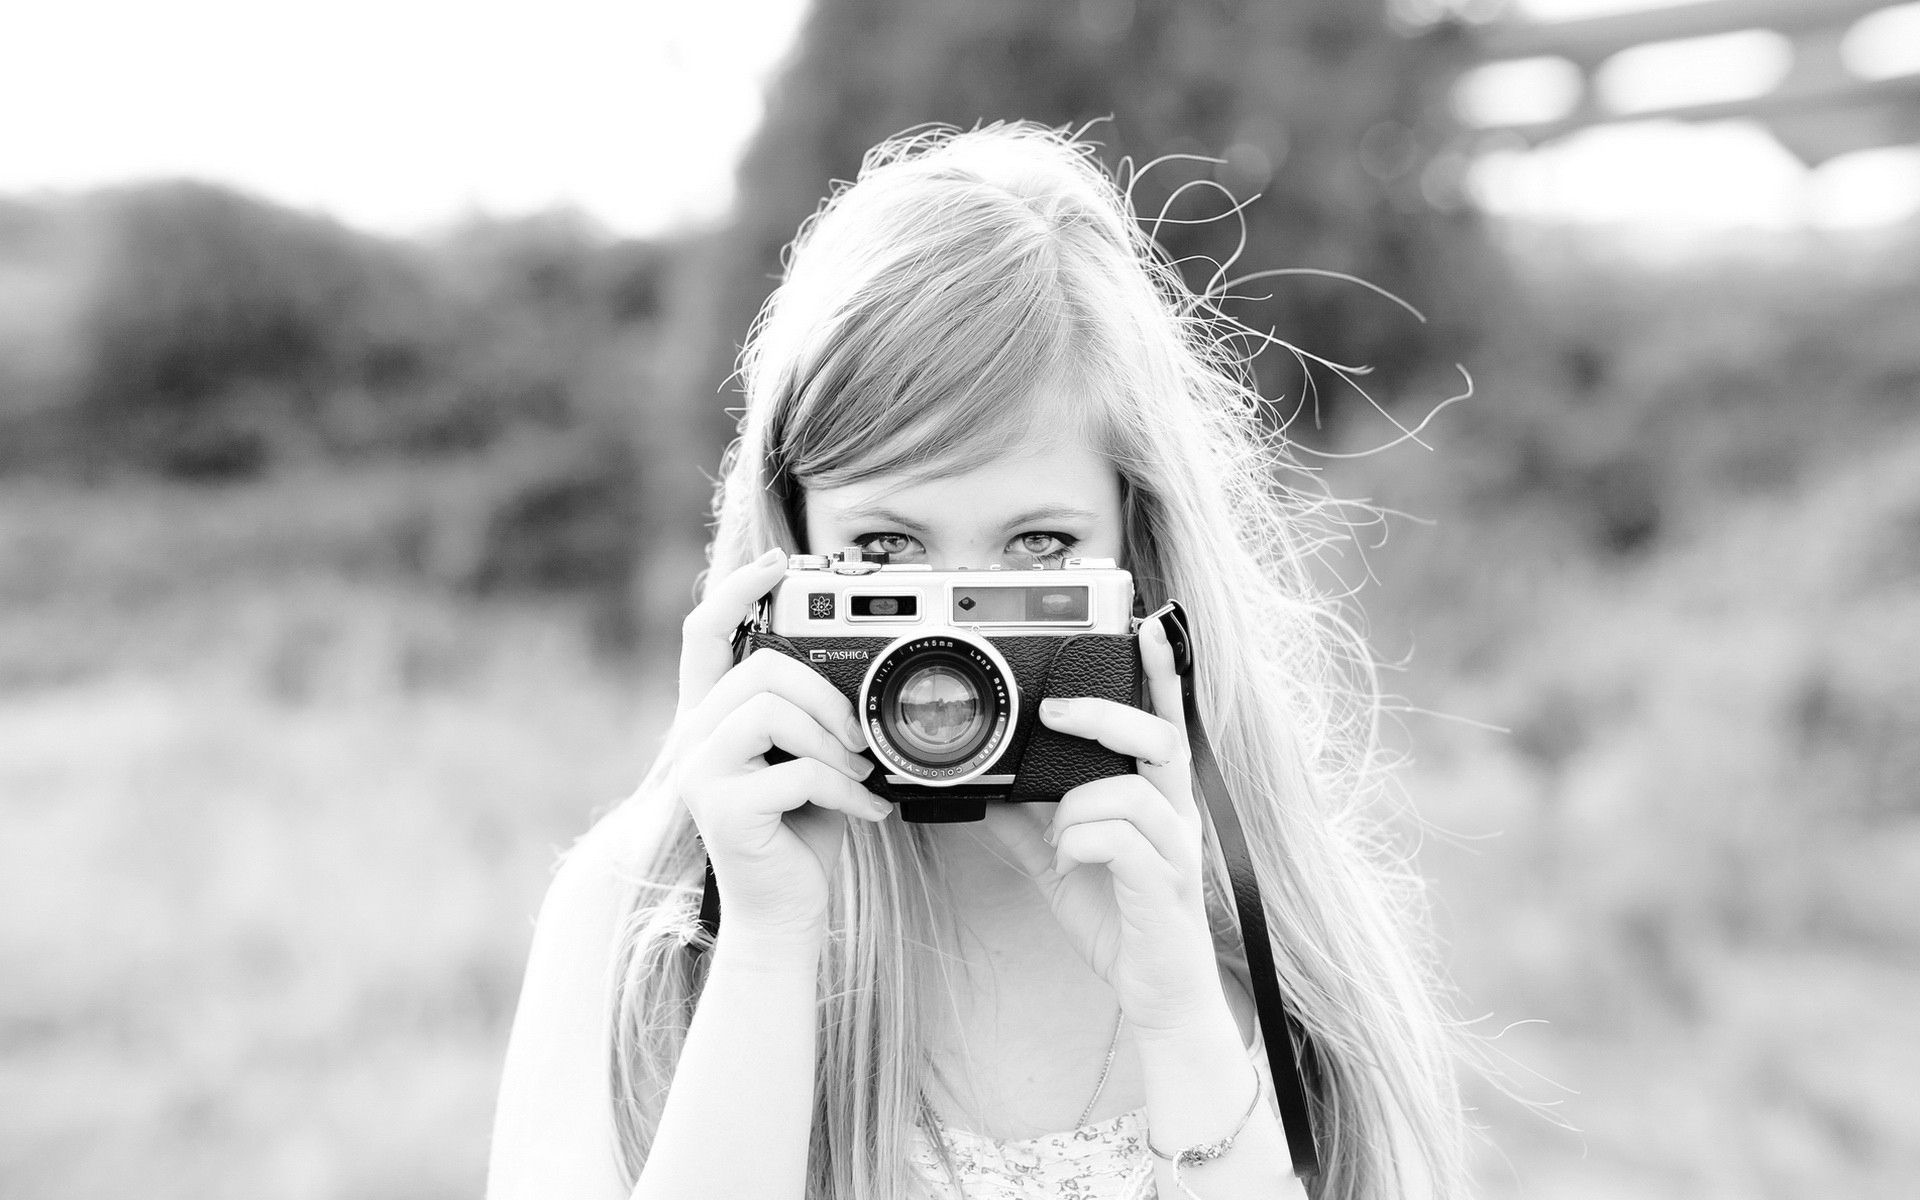 Girl With Camera Black And White Photo Wallpaper Image